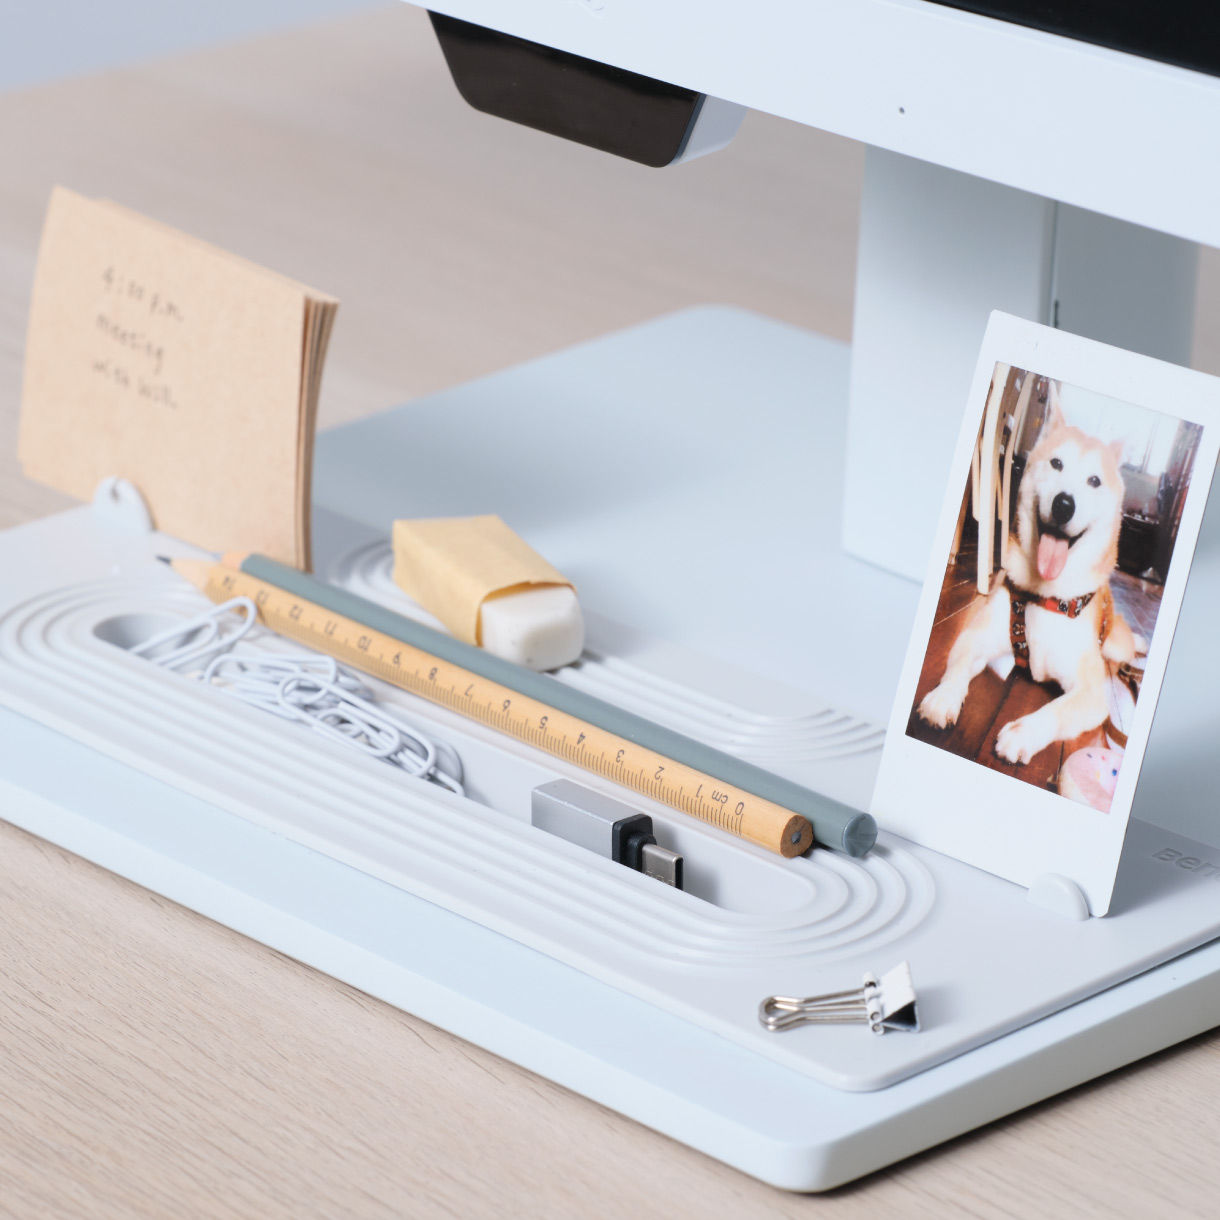 BenQ GW3290QT optional accessory base cover GC01 organizes stationery and clears your desk surface for higher productivity.